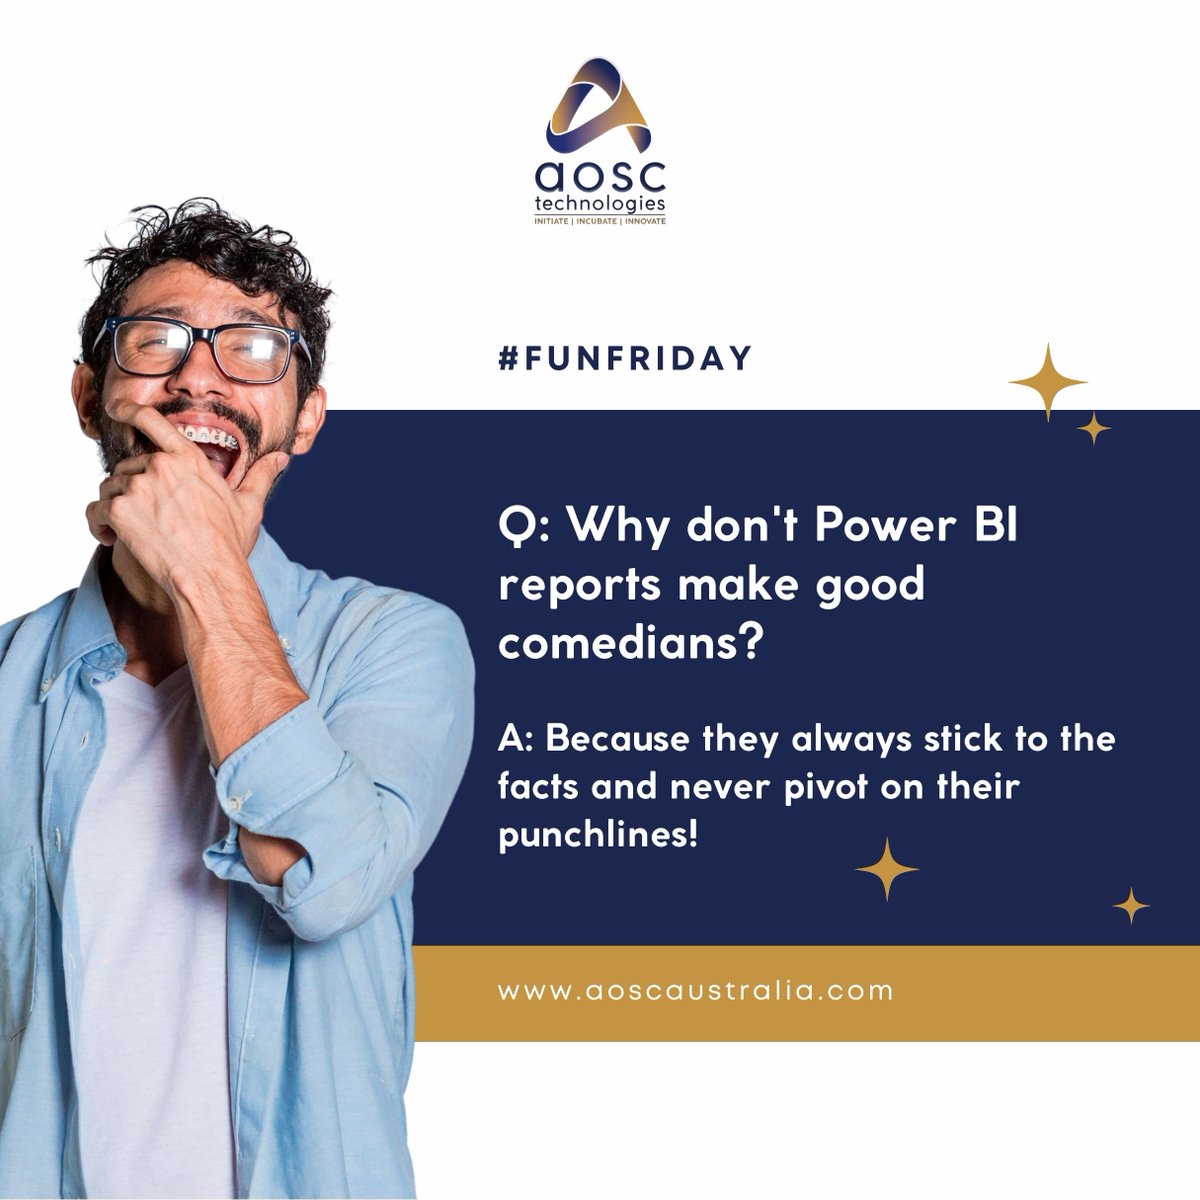 😄✨ Bring some joy to your tech-savvy moments with this lighthearted Power BI joke:

Q: Why don't Power BI reports make good comedians?
A: Because they always stick to the facts and never pivot on their punchlines!
#PowerBIHumor #DataJokes #TechLaughs #AOSCAustralia #Australia